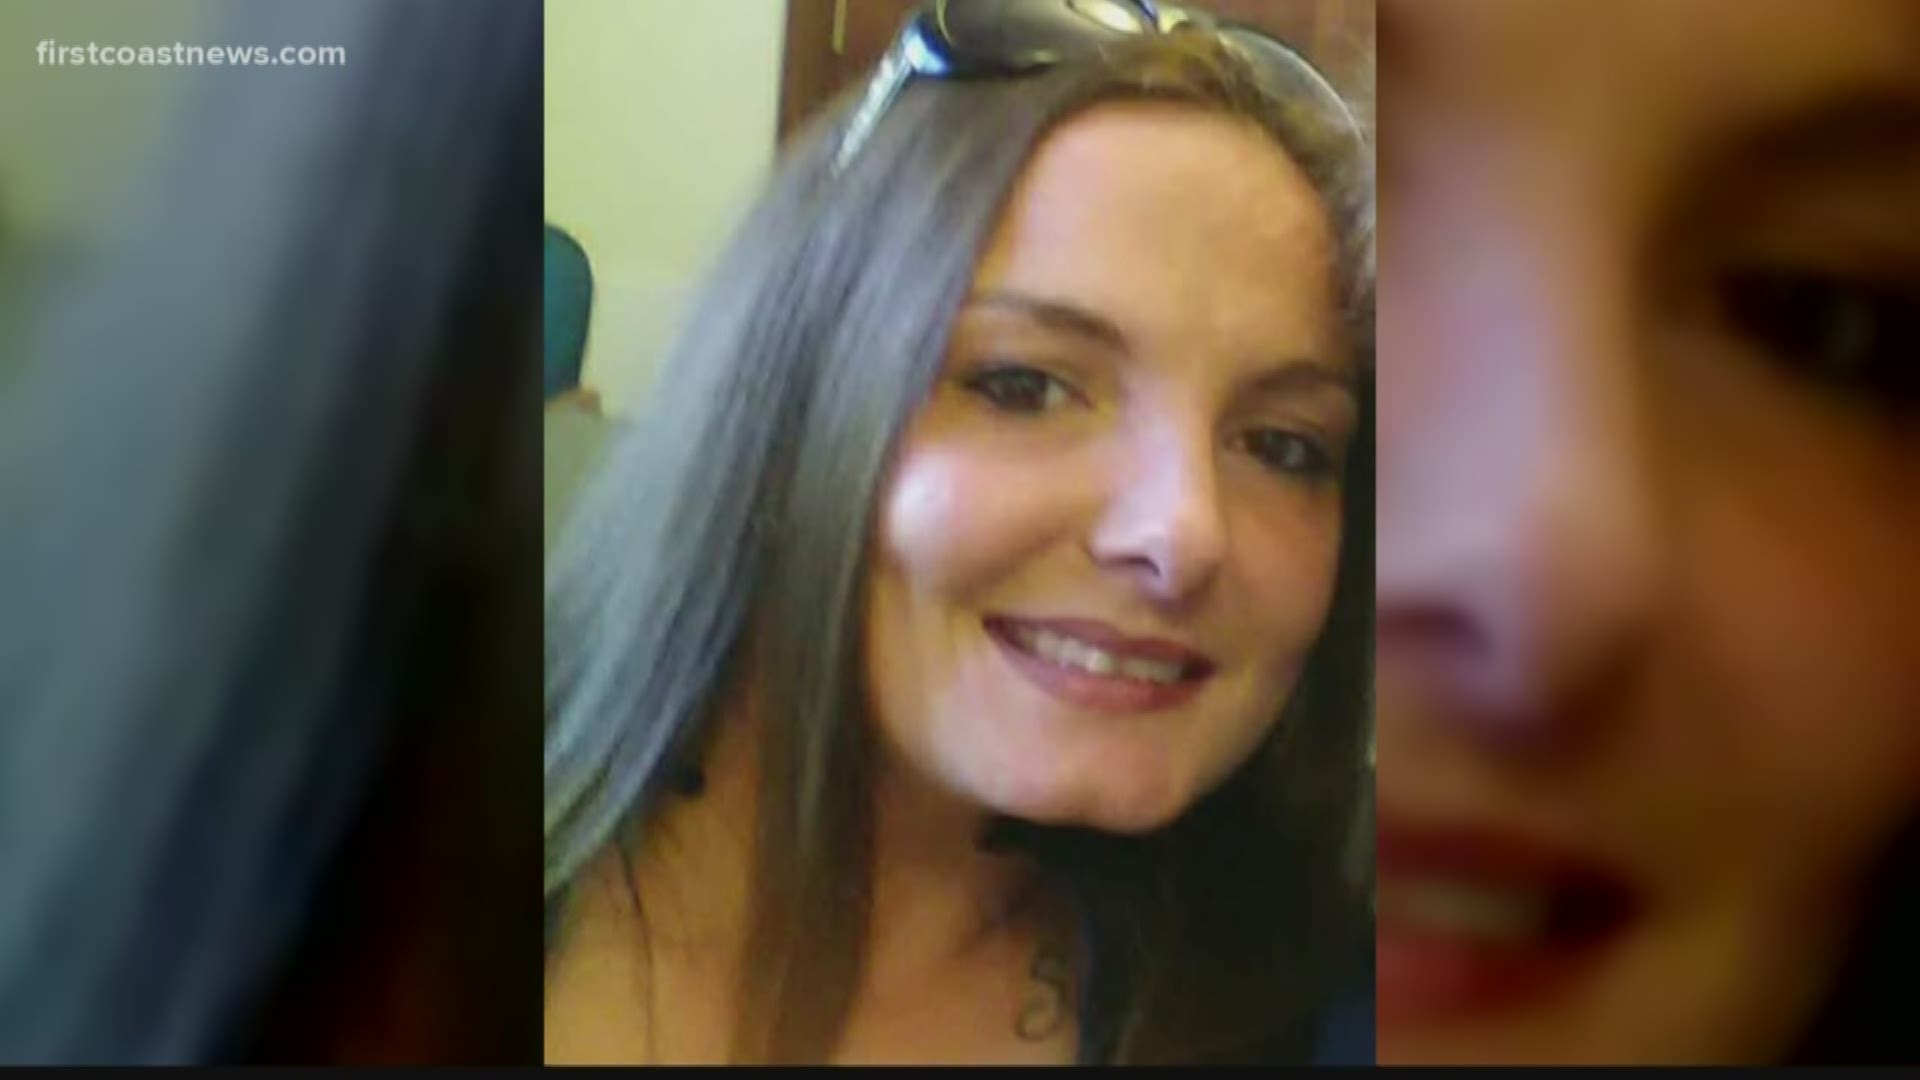 The family of a young woman who died while in police custody is launching their own investigation into her death. Bethany Anderson has more on this story.